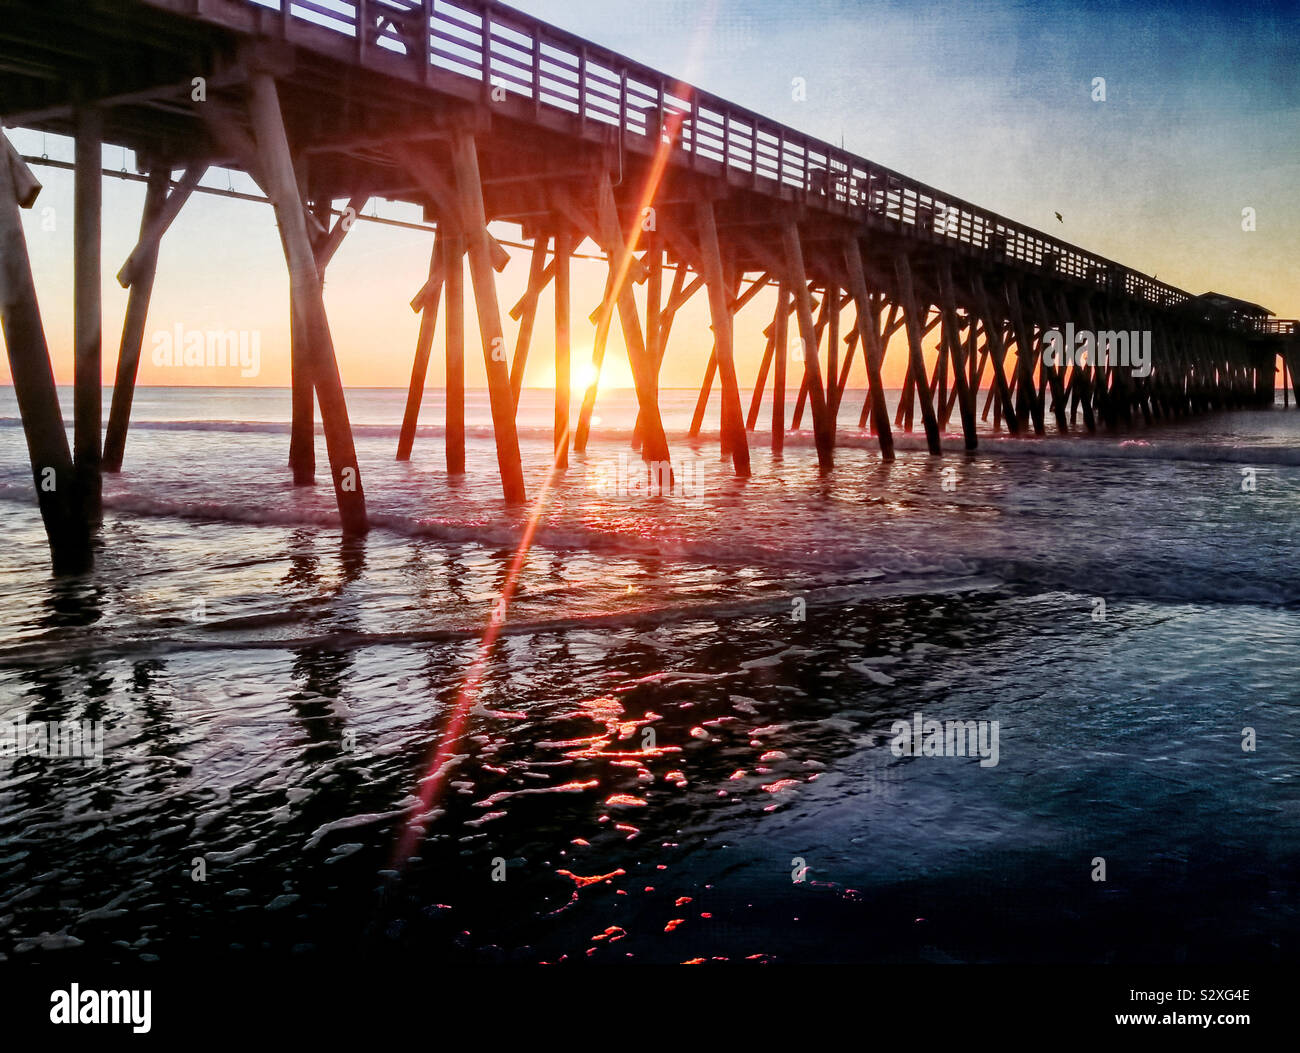 Sunrise behind a pier in Myrtle Beach South Carolina. The bright lens flare from the rising sun creates visual interest. Stock Photo